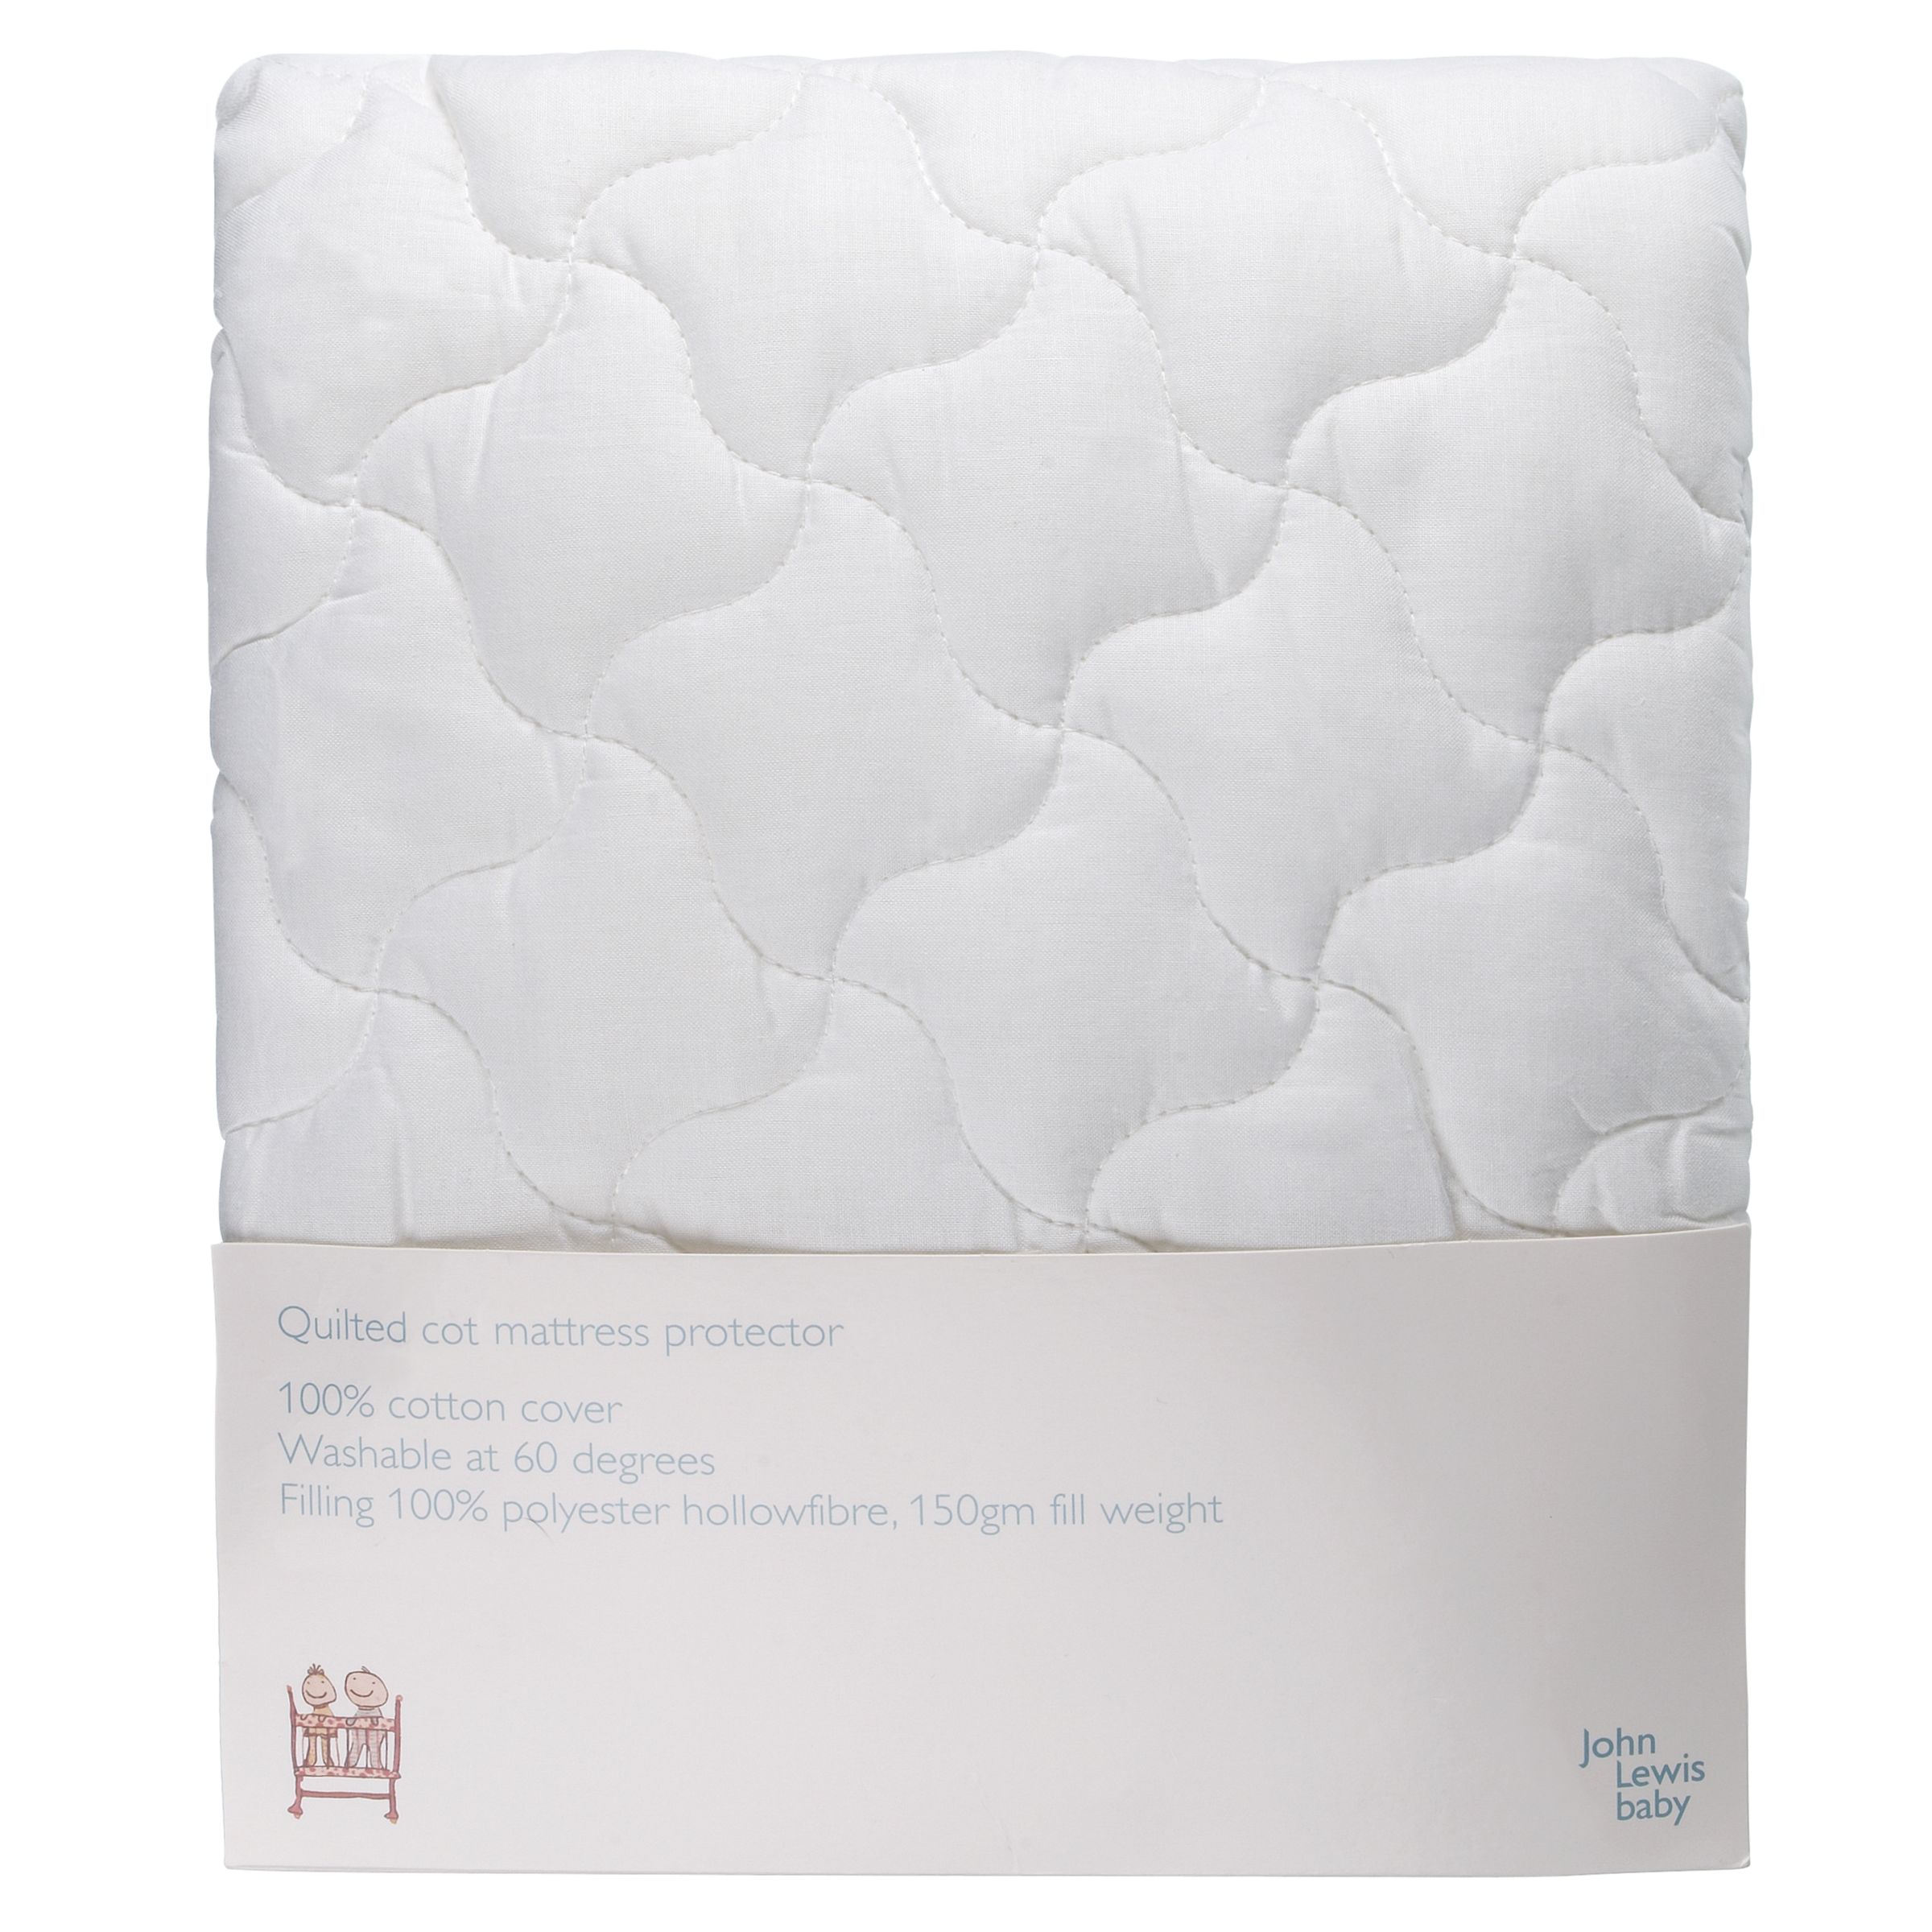 Baby Quilted Cot Mattress Protector,